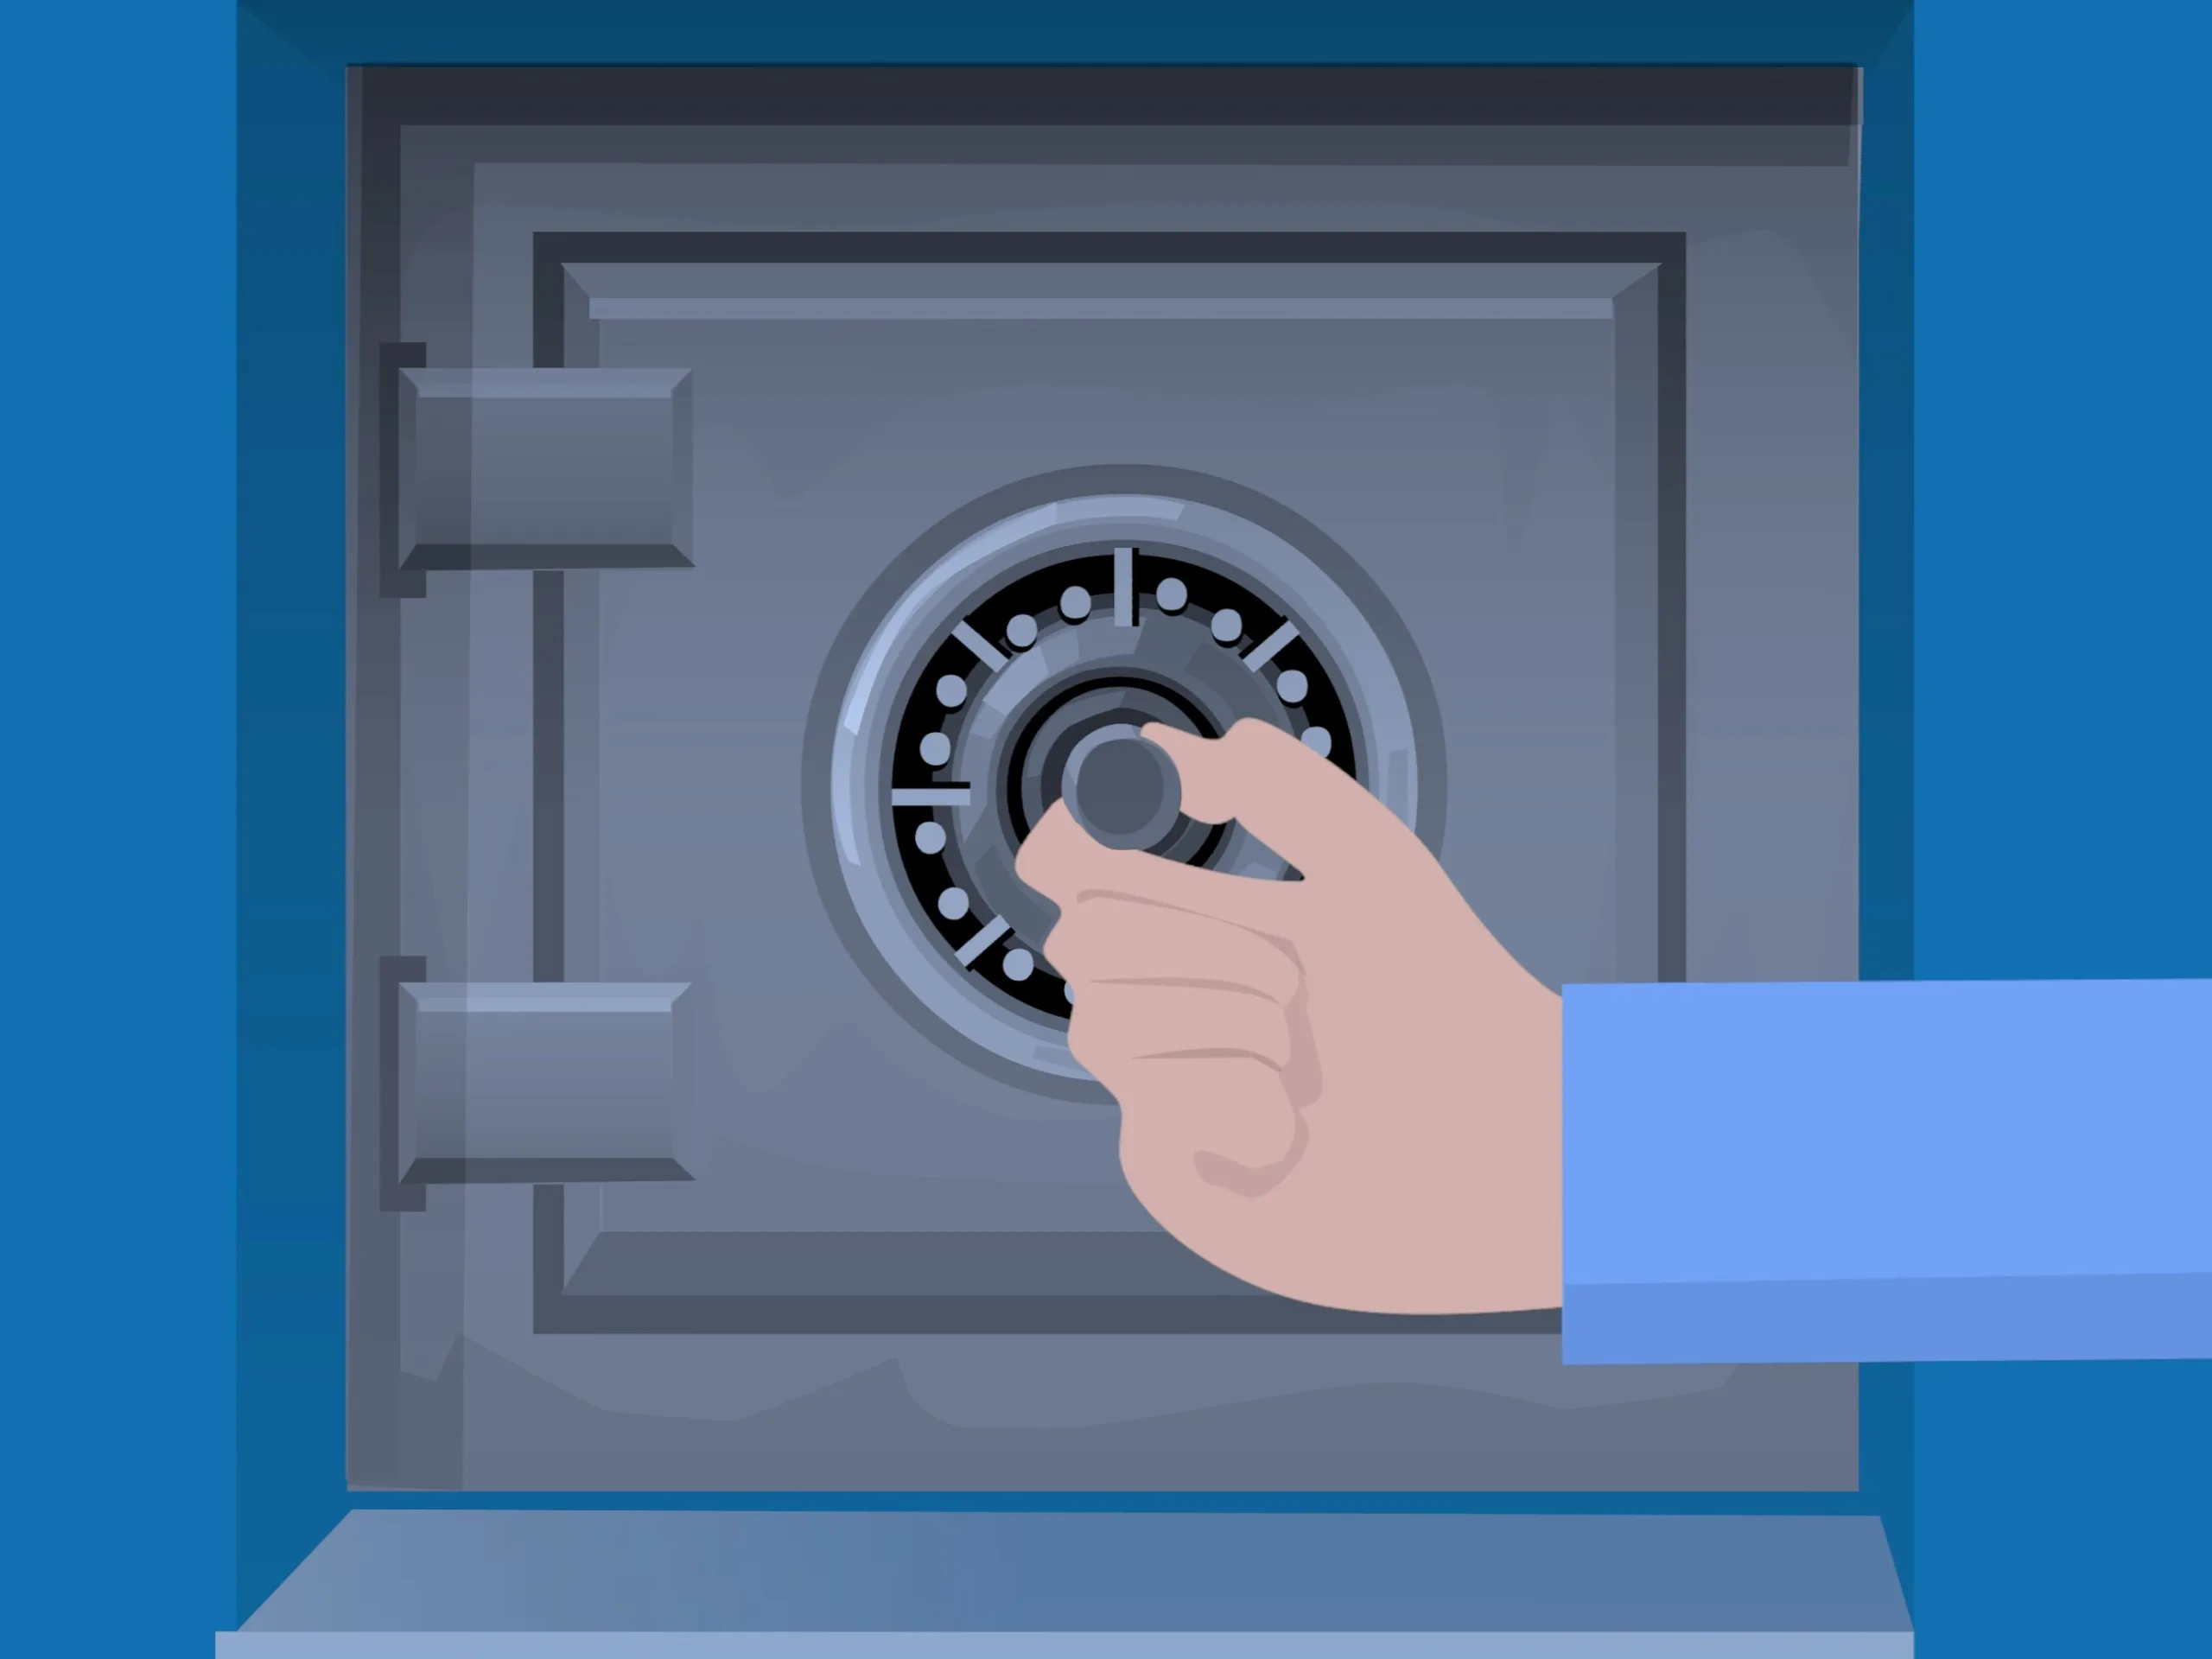 Illustrated hand turning the dial of a safe protecting assets.